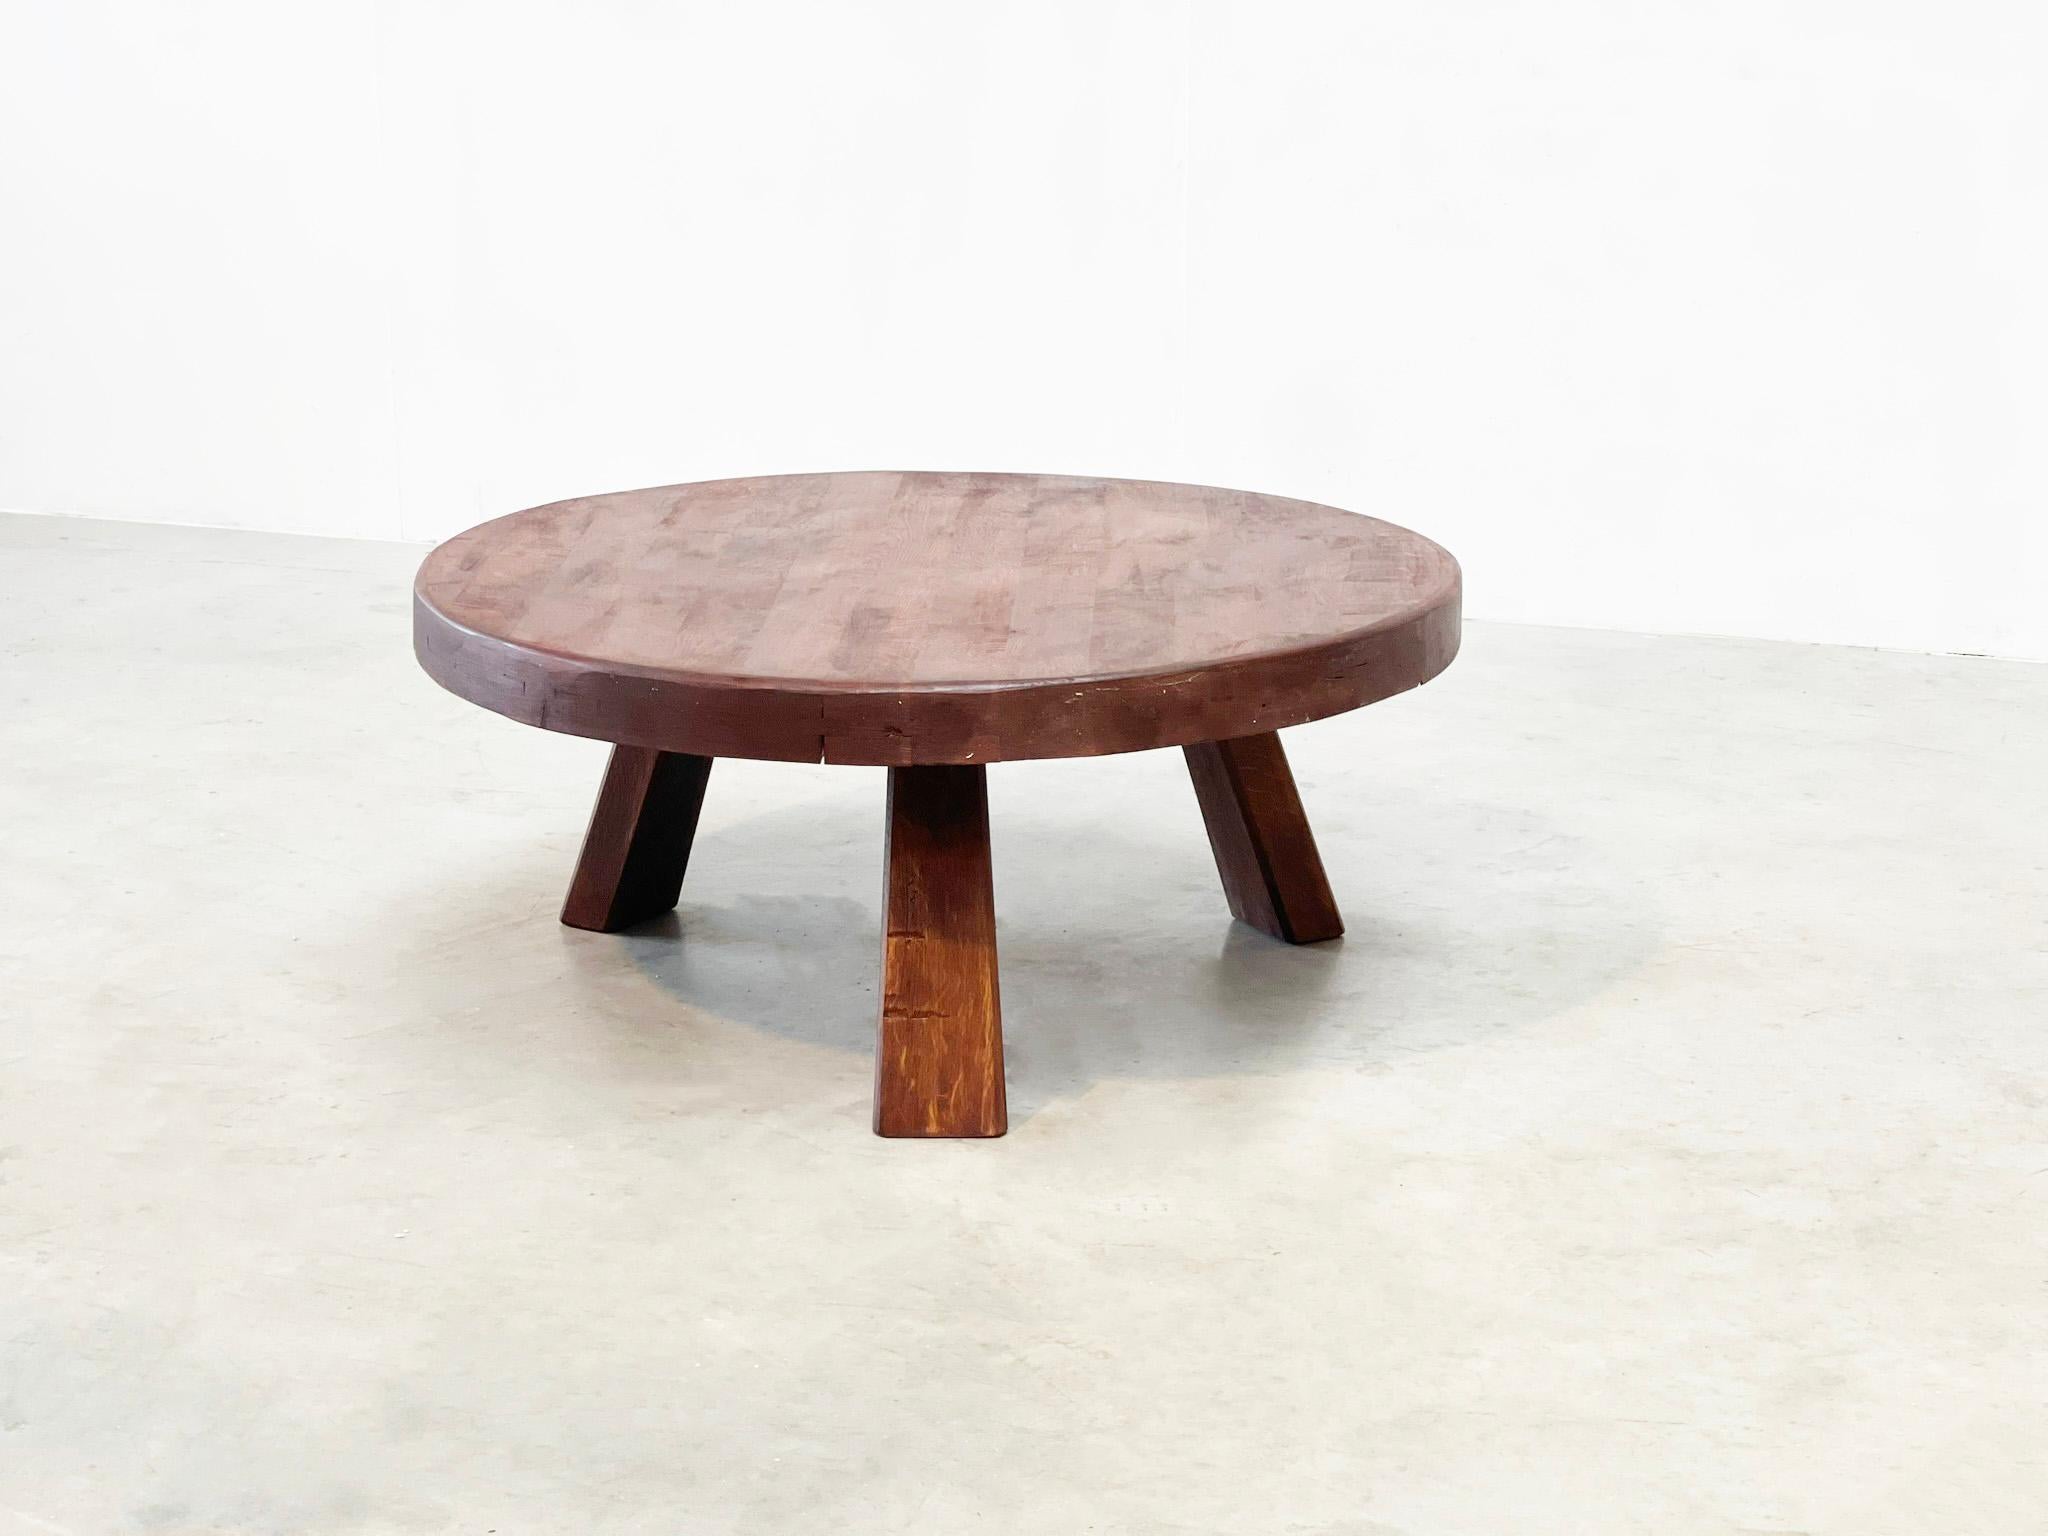 Brutalist and elegant coffee table
Brutalist oak coffee table

Design in its purest form. A very heavy oak coffee table made in the 80s. The wood has acquired a very nice patina over the years. The table is a very large and heavy piece. This was